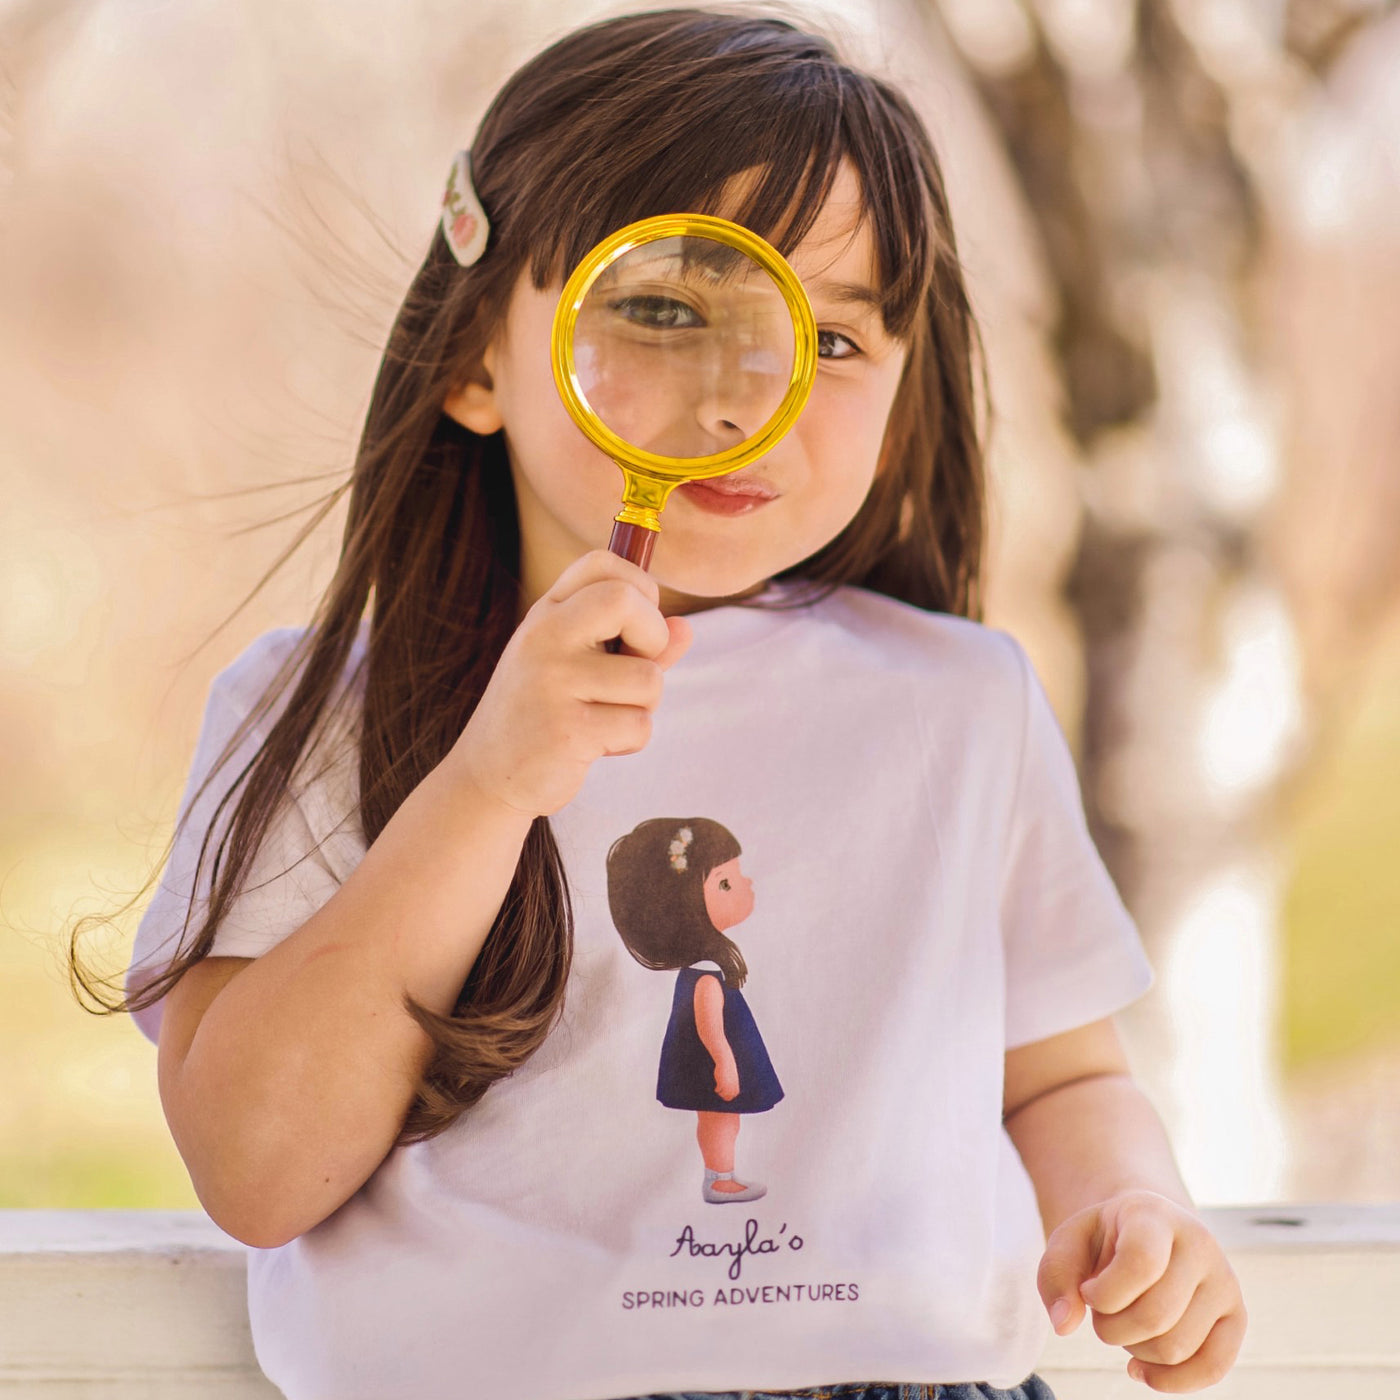 Personalized T-shirts with a Custom Illustration of Your Child